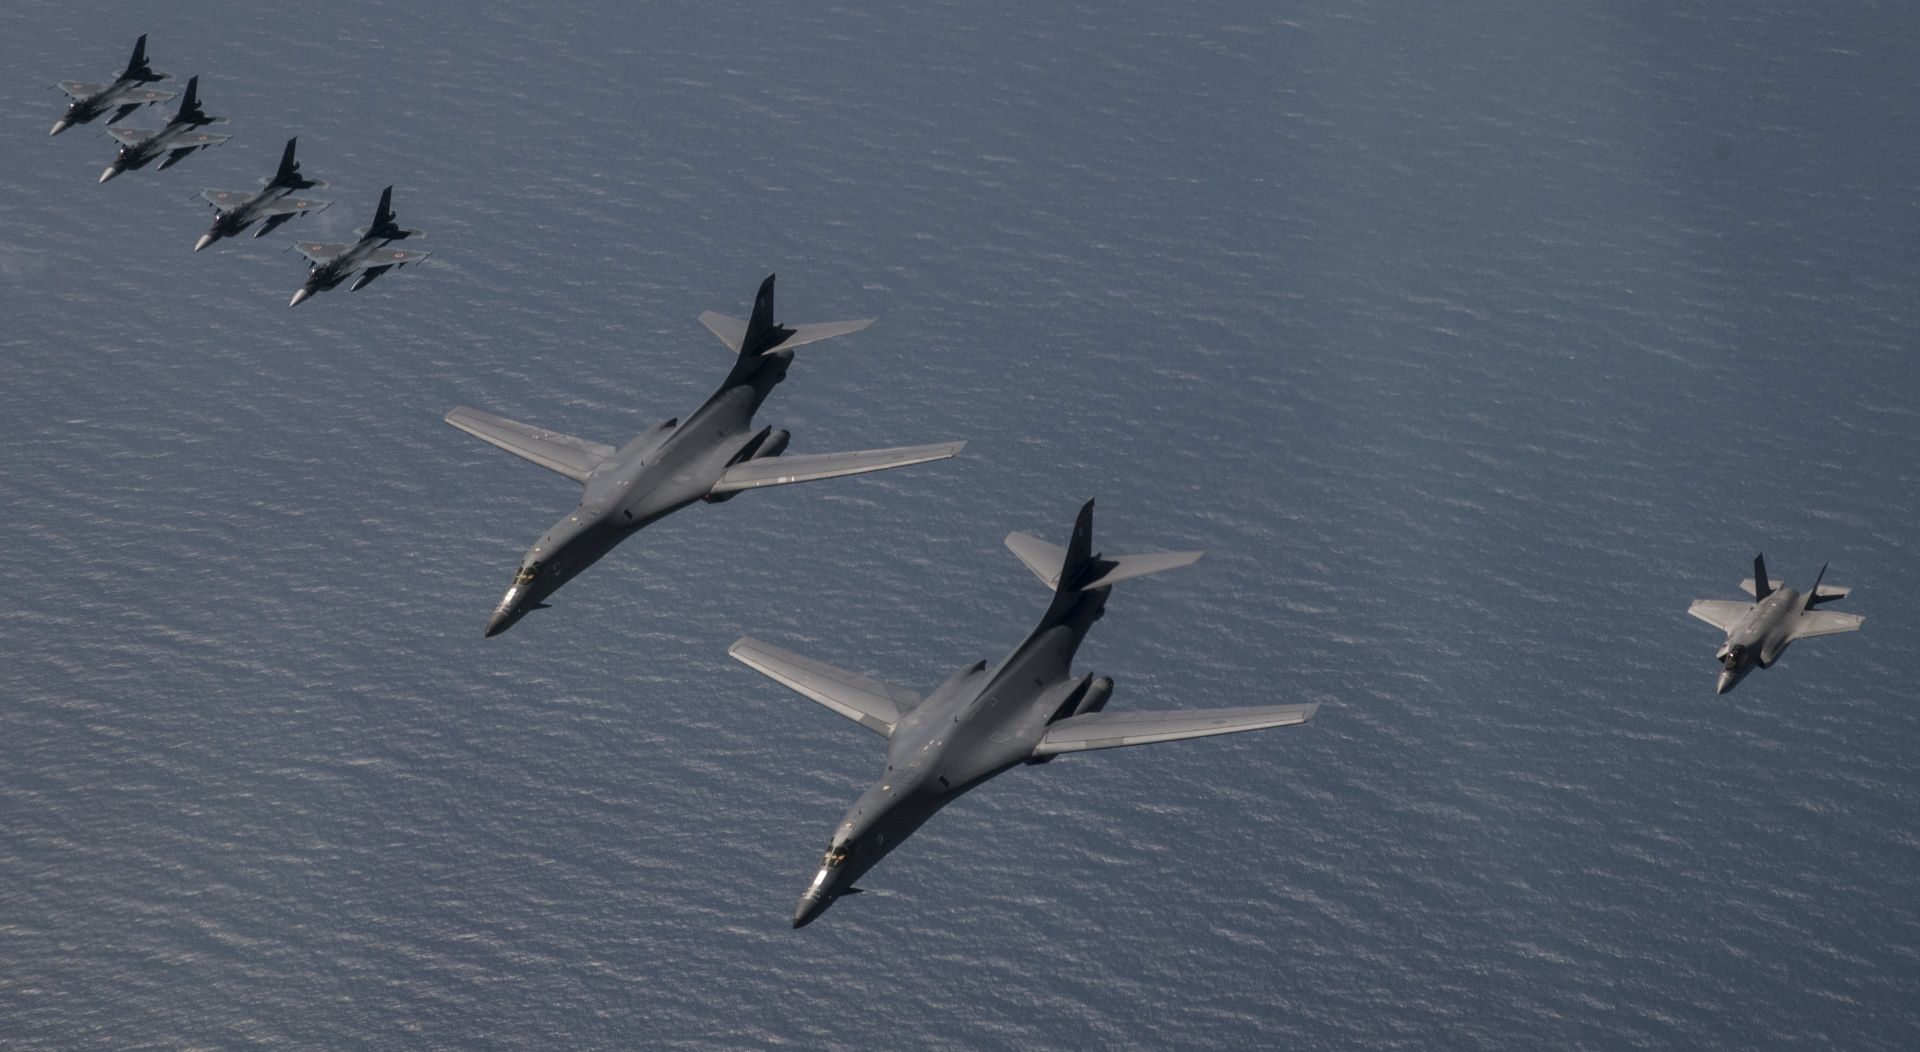 epa06212915 A handout photo made available by the US Air Force on 19 September 2017 shows US Air Force B-1B Lancers, US Marine F-35B Lightning IIs and Japan Air Defense Force F-2s flying in formation during a show of force, north of Japan, 18 September 2017. The flight took place in response to a North Korean test-launch of an intercontinental ballistic missile over the northern Japanese island of Hokkaido on 15 September 2017.  EPA/US AIR FORCE/CAPT. MIKE KARNES HANDOUT  HANDOUT EDITORIAL USE ONLY/NO SALES